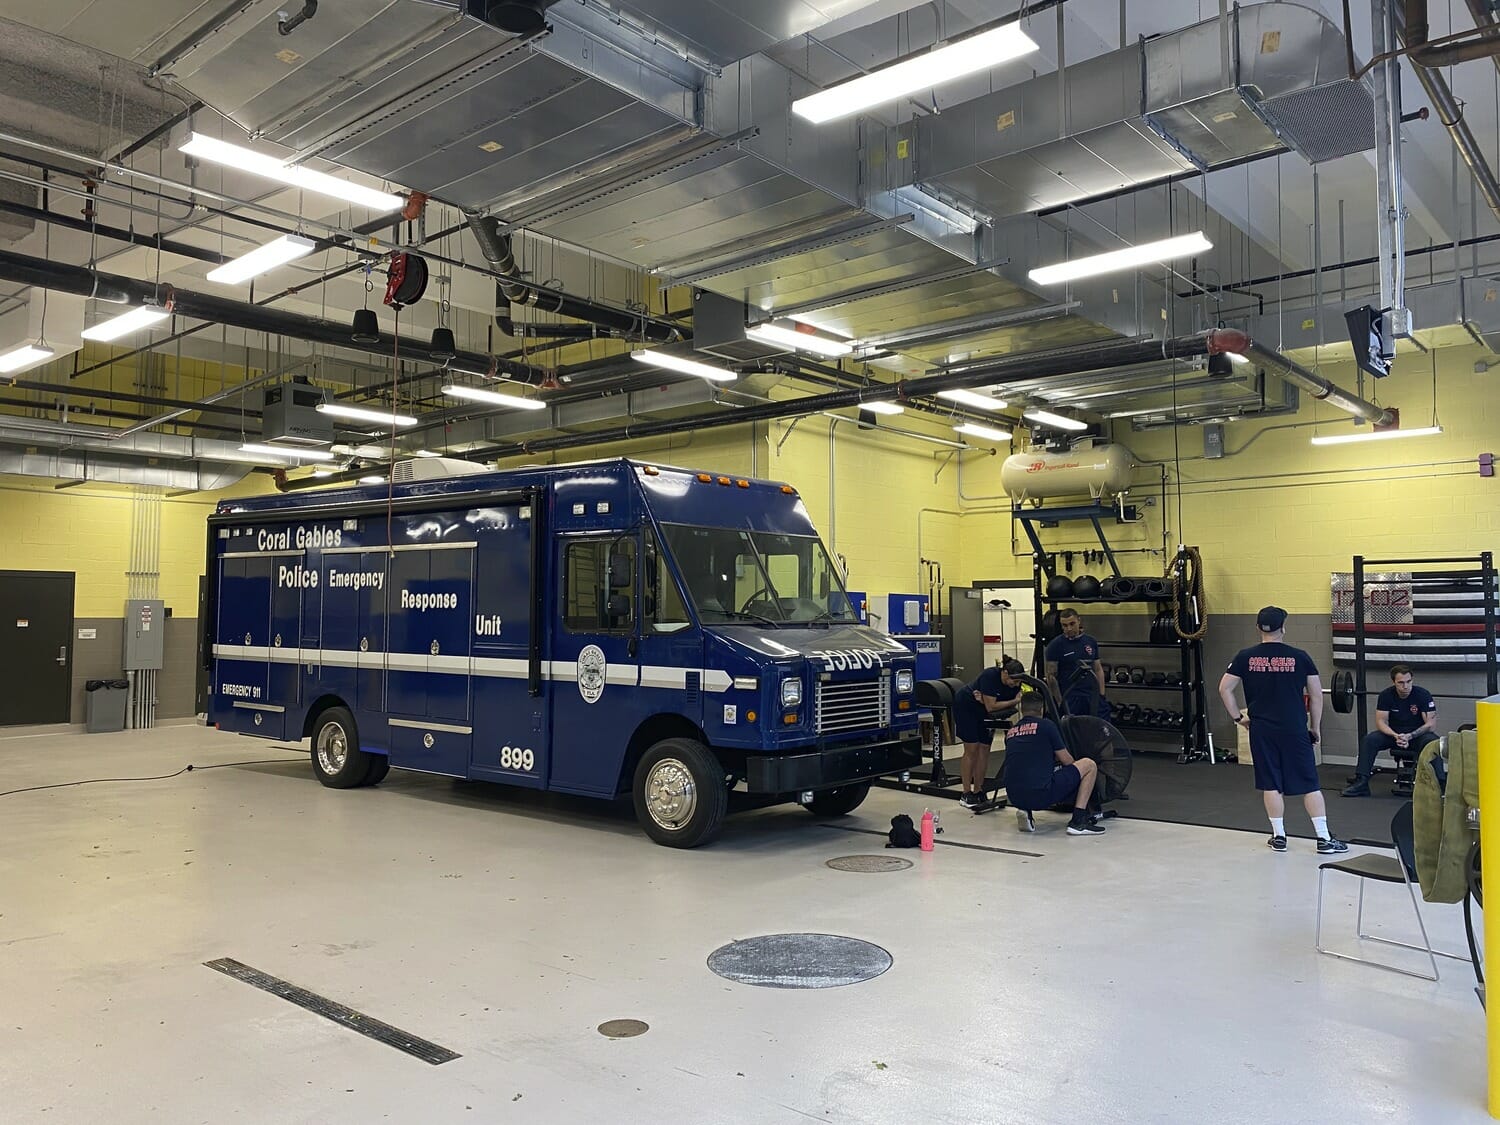 A blue ambulance parked in a large room.